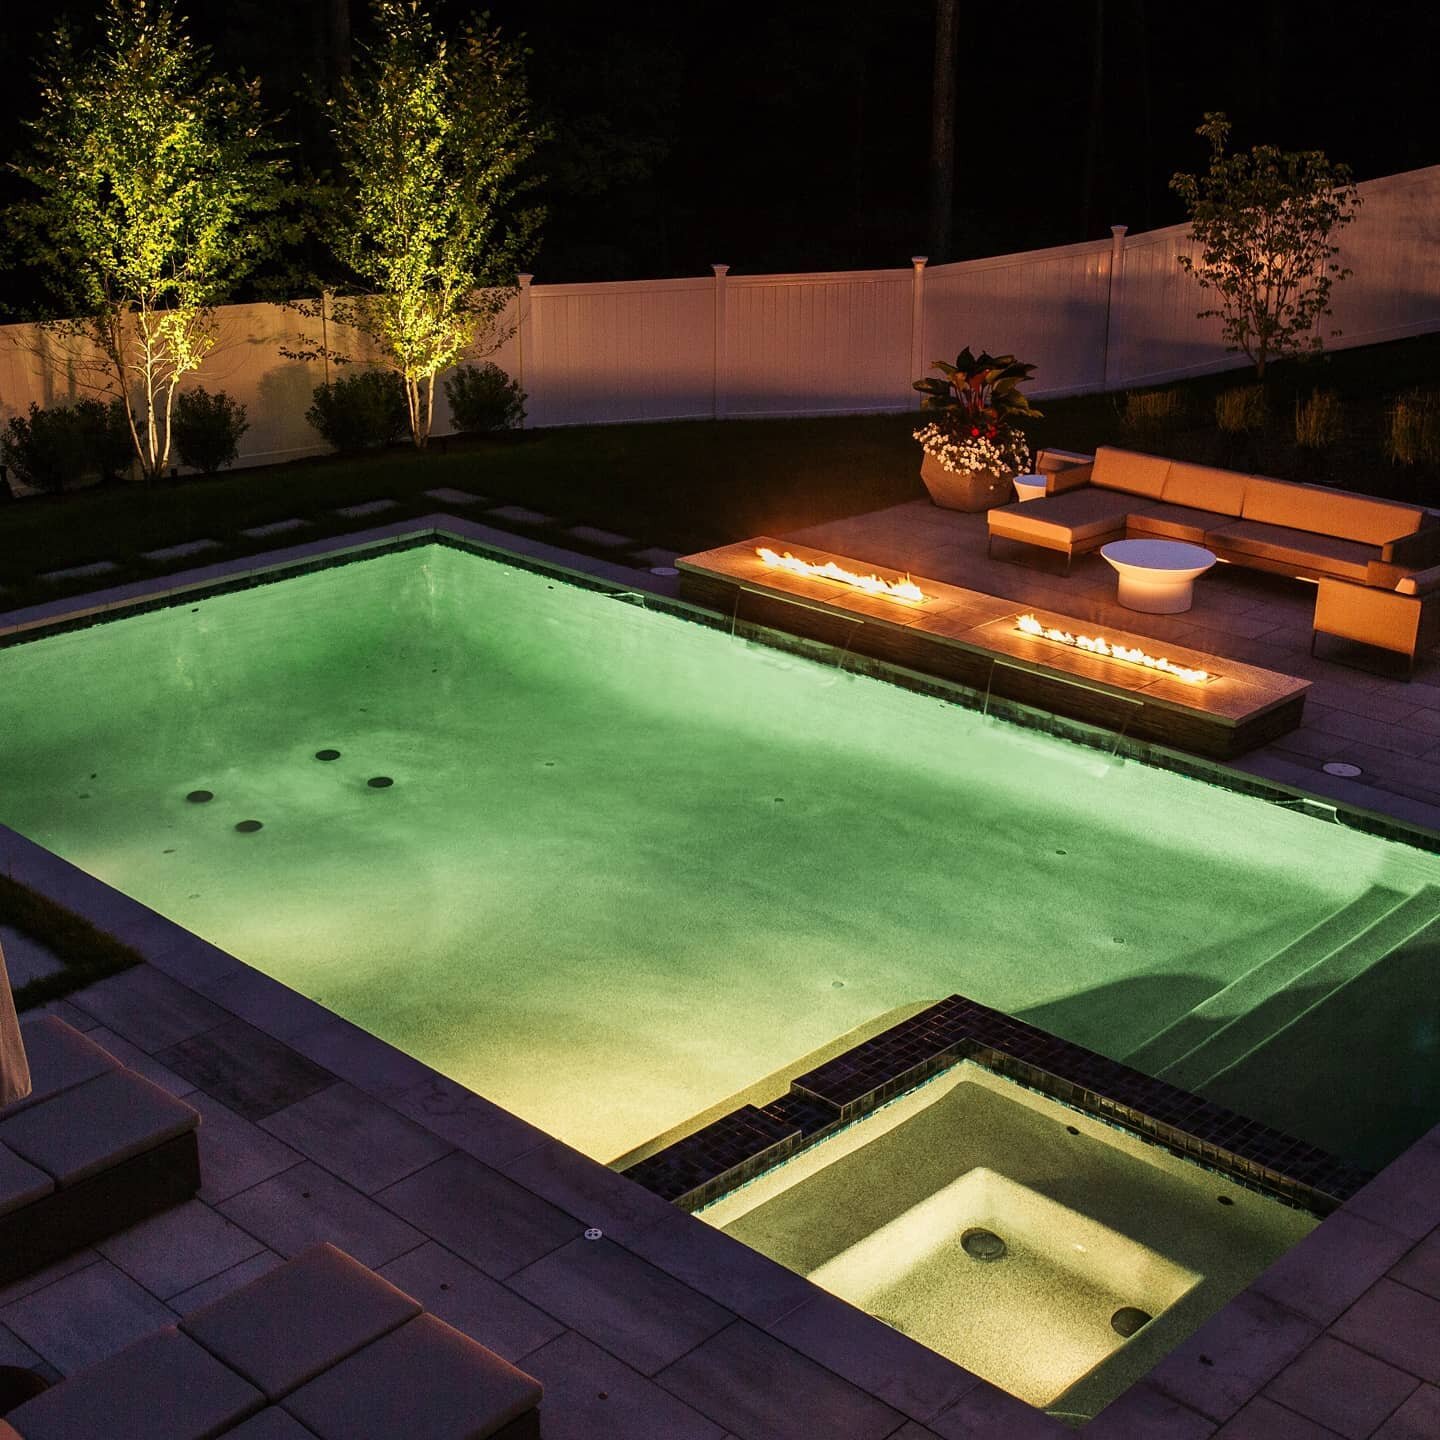 Pool landscape design and installation has become a passion and focus for our business. It has been so rewarding to create these spaces to match each clients vision so they can step through their back door to their own escape.